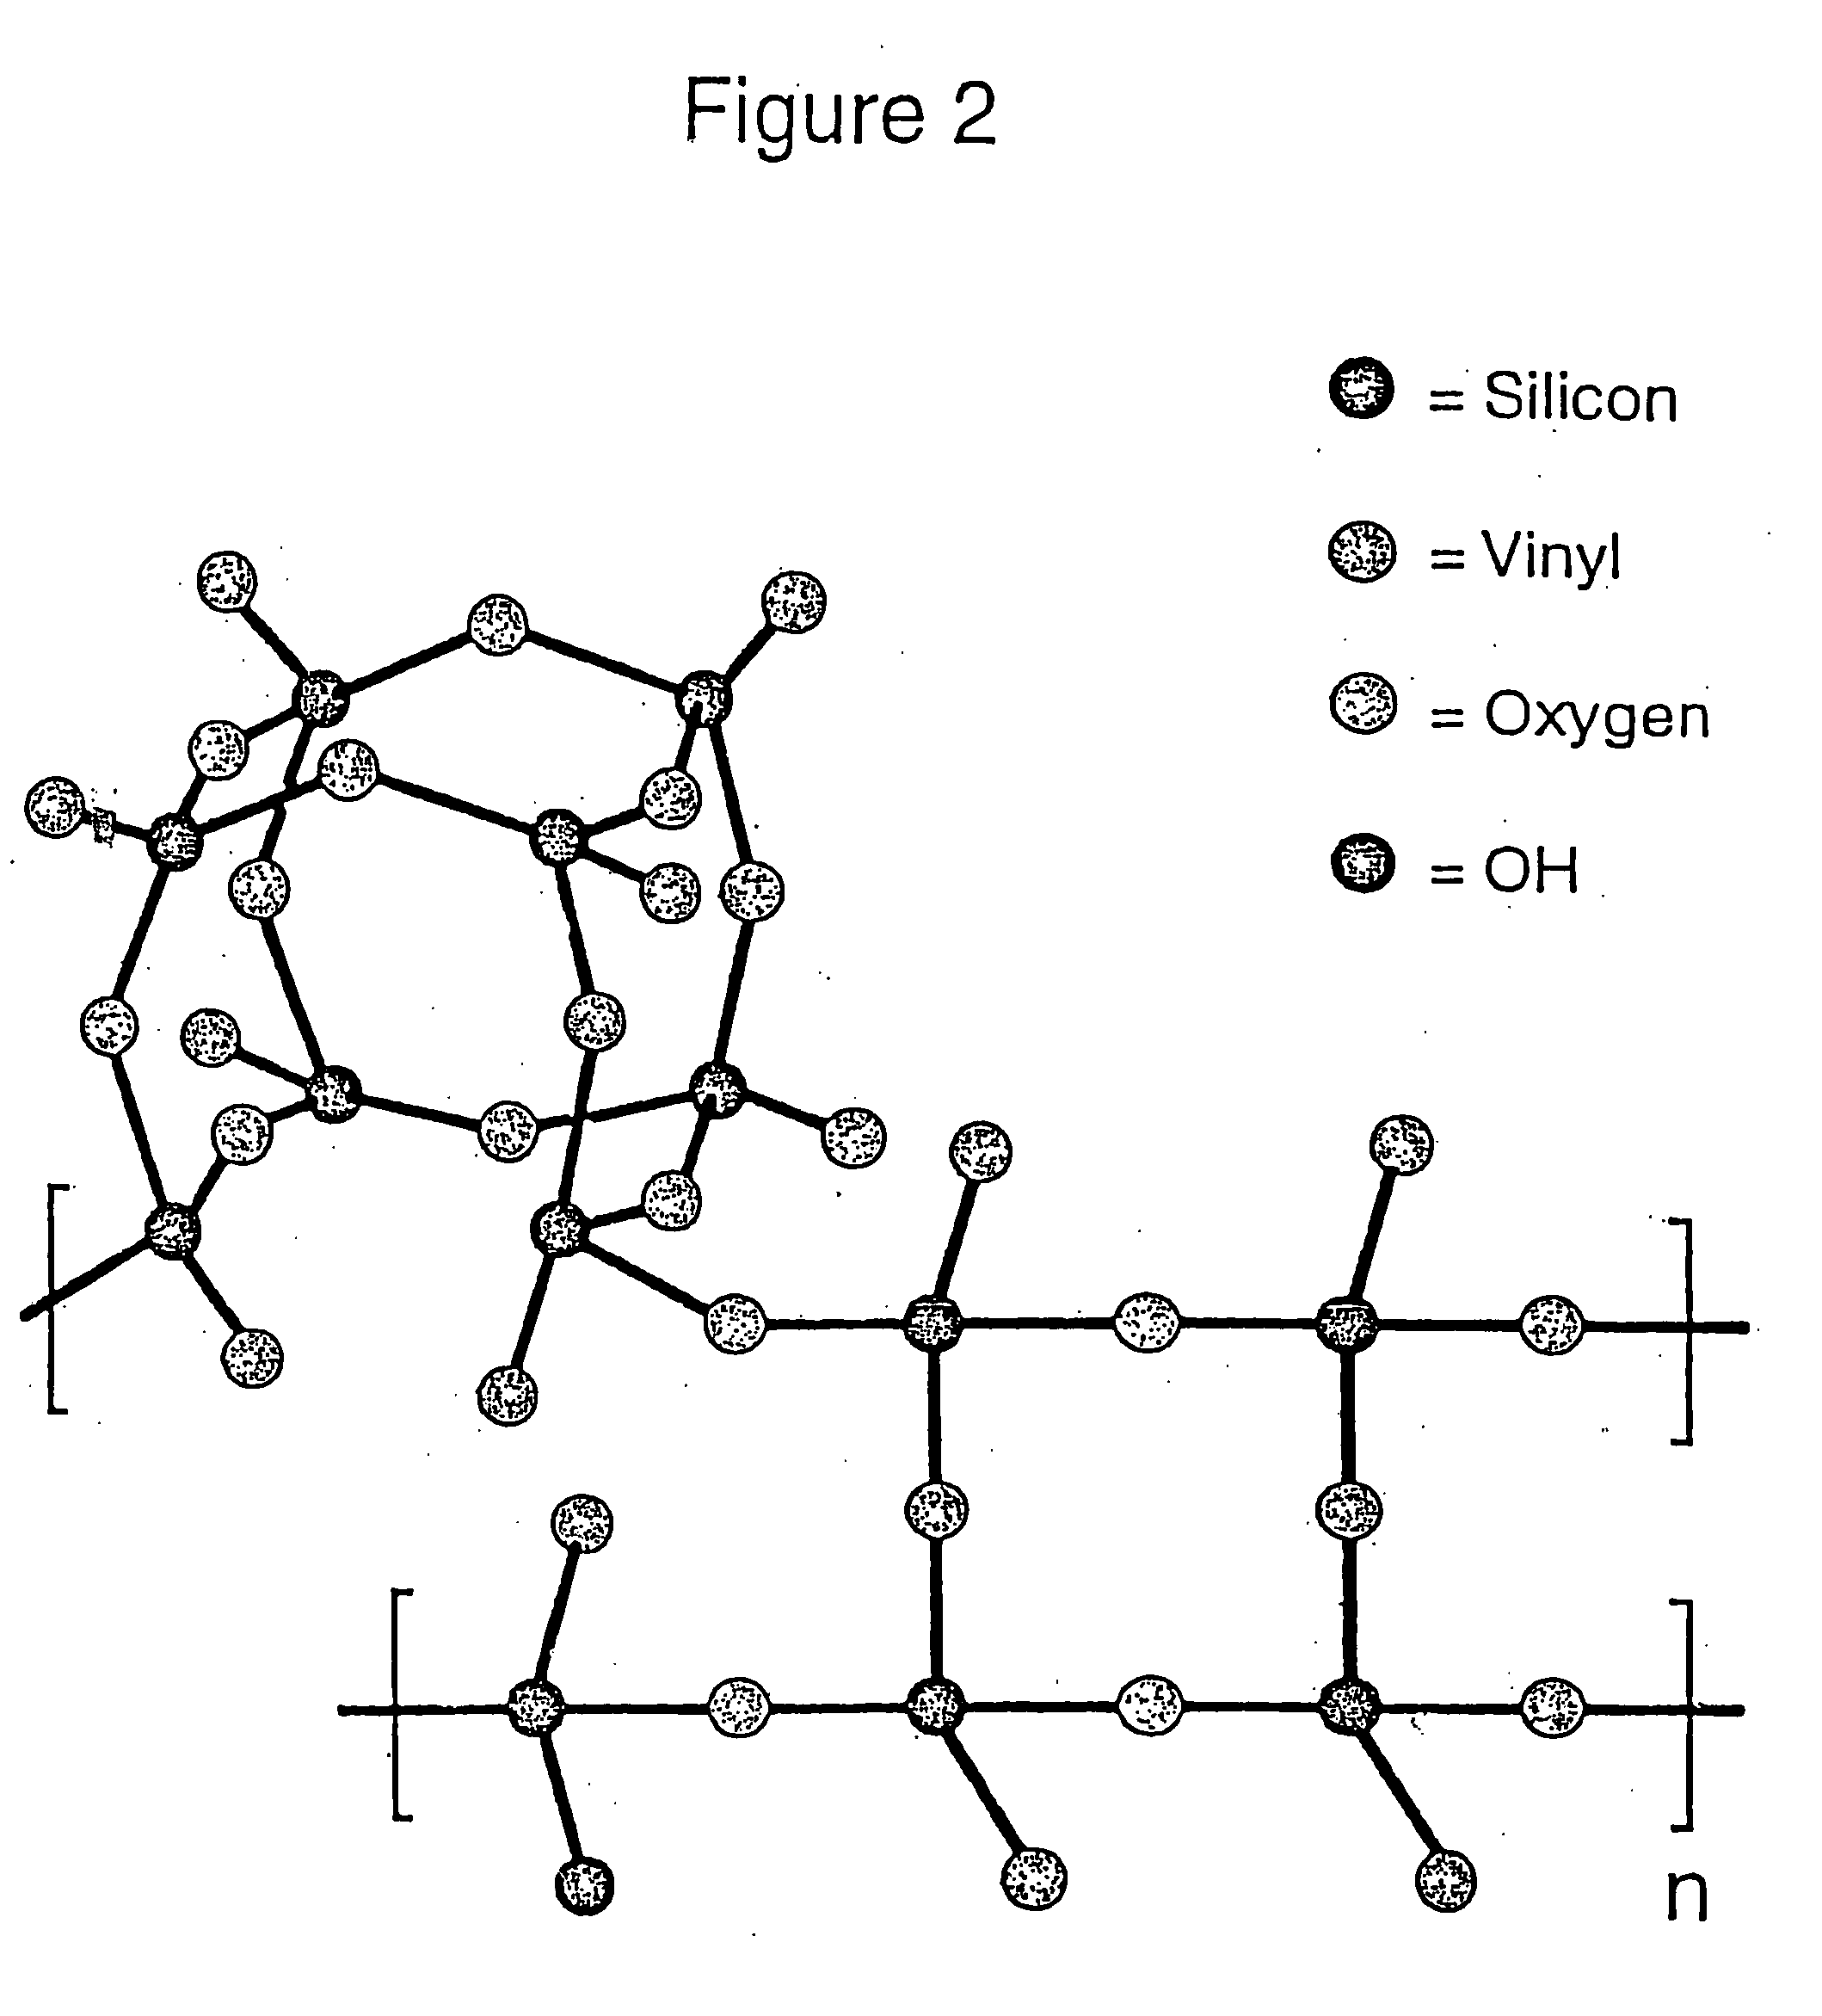 Porous gas permeable material for gas separation